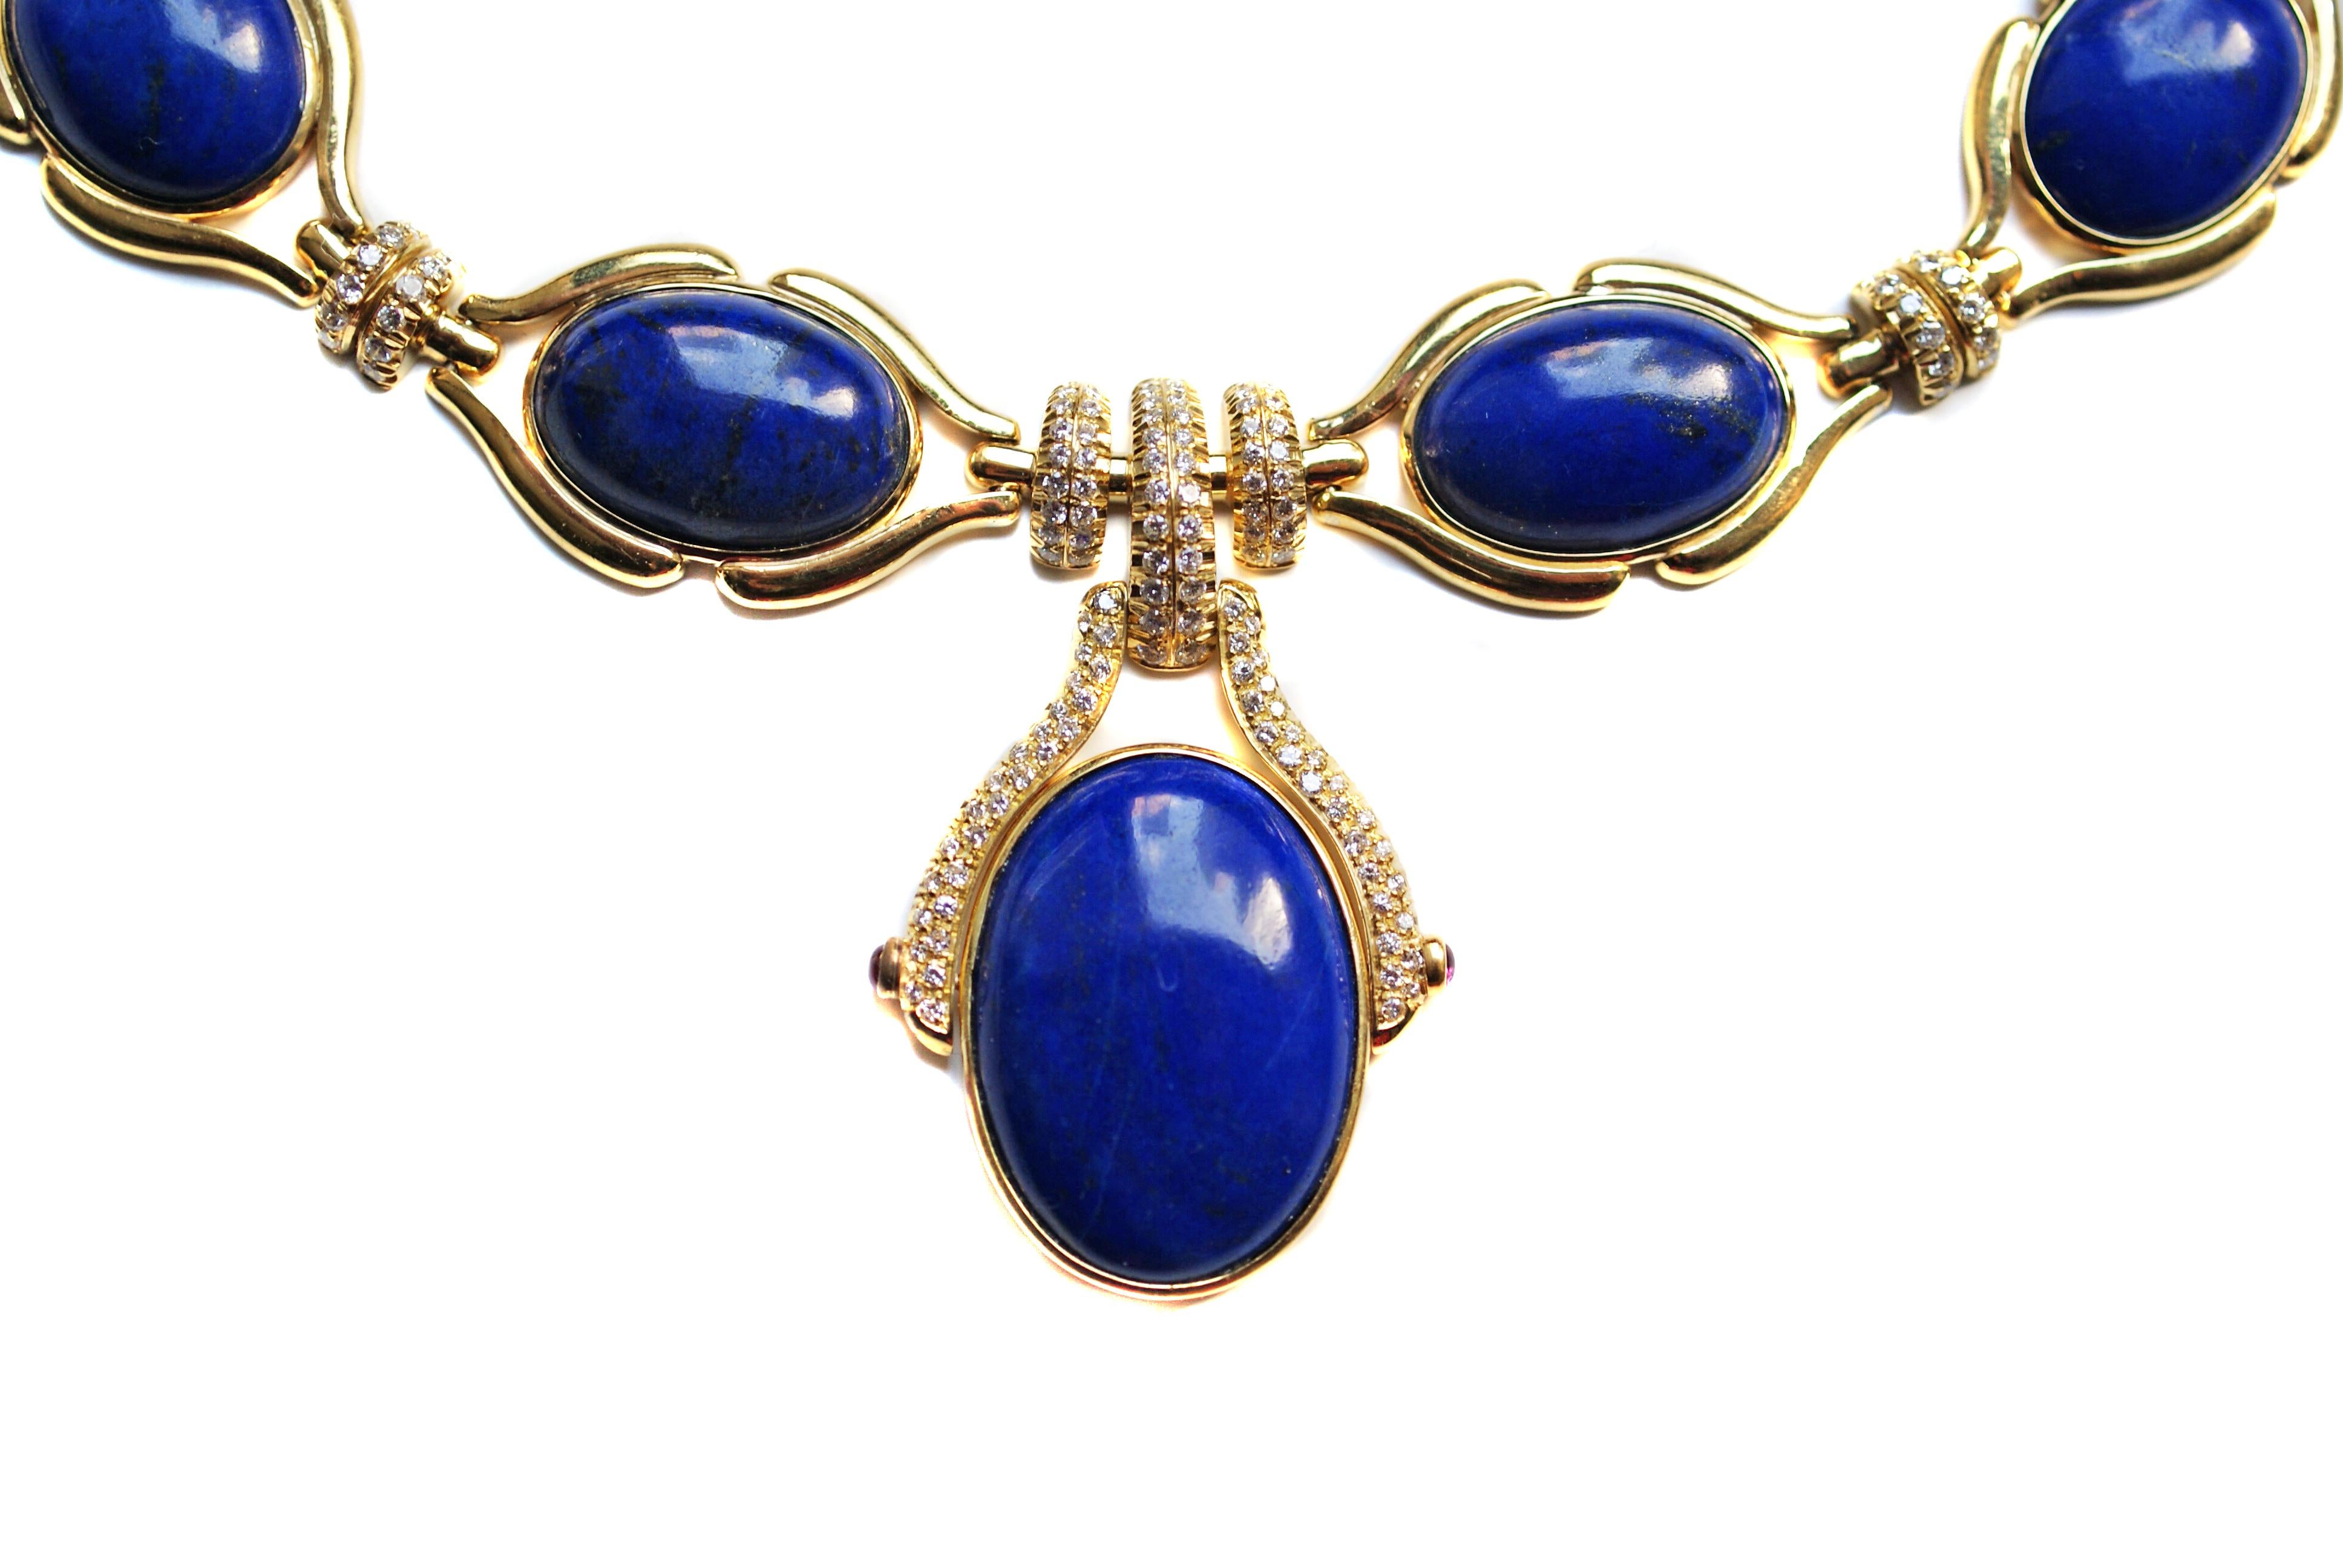 Finely crafted 18 karat yellow gold necklace set with 12 deep azul blue lapis lazuli cabochons. Each of these cabochons have been picked to match perfectly in color and have an approximate total weight of 185 carats. Embellishing this necklace, 234